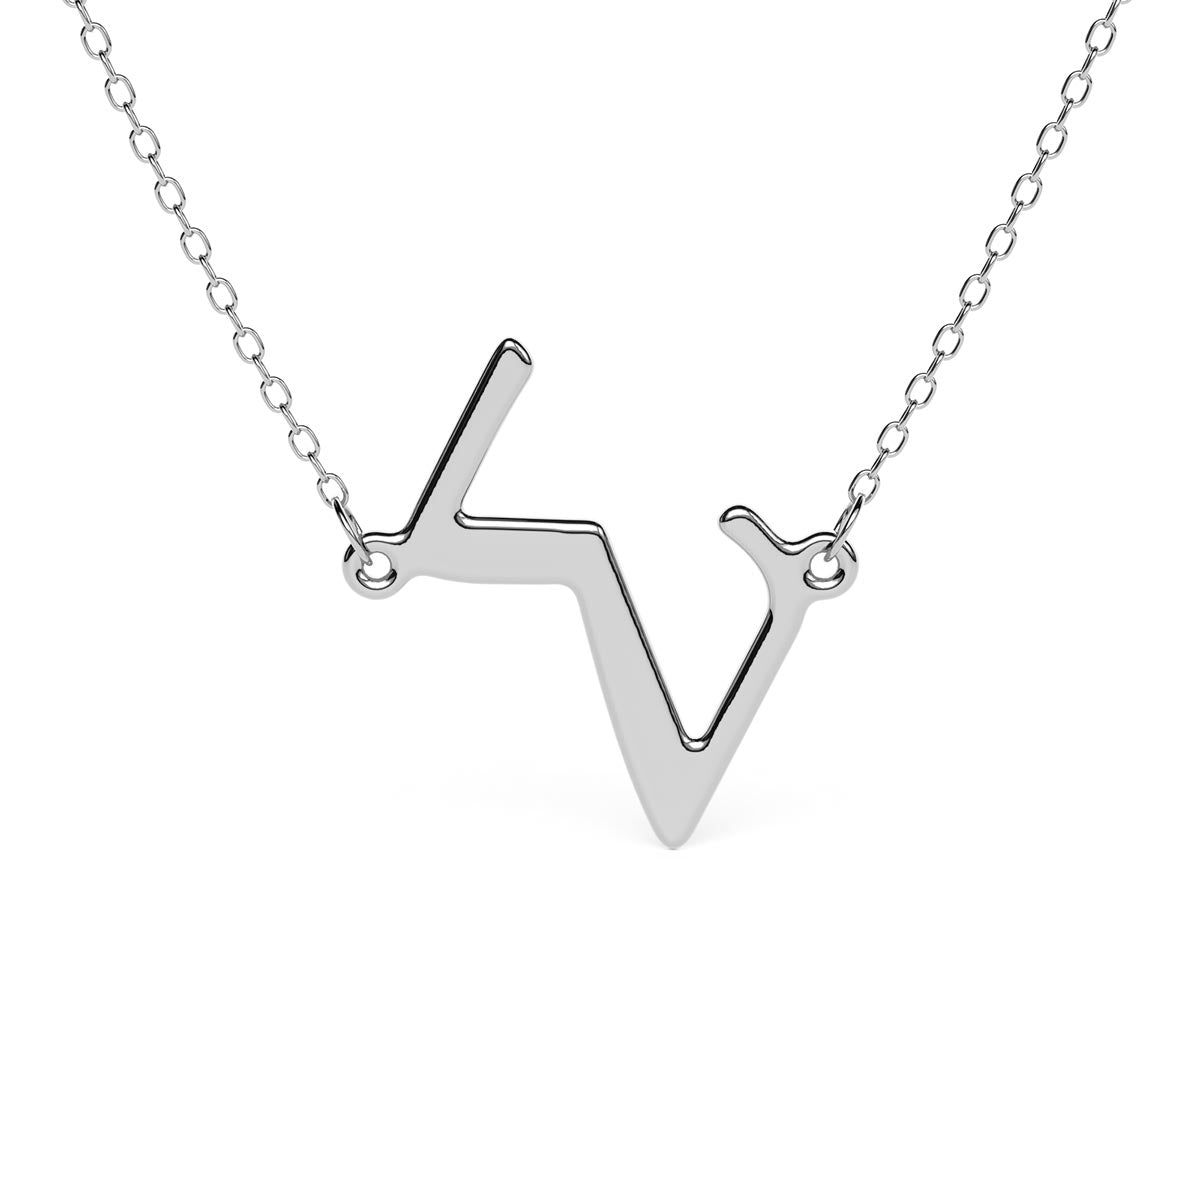 LV Volt Upside Down Pendant, Yellow Gold - Jewelry - Categories